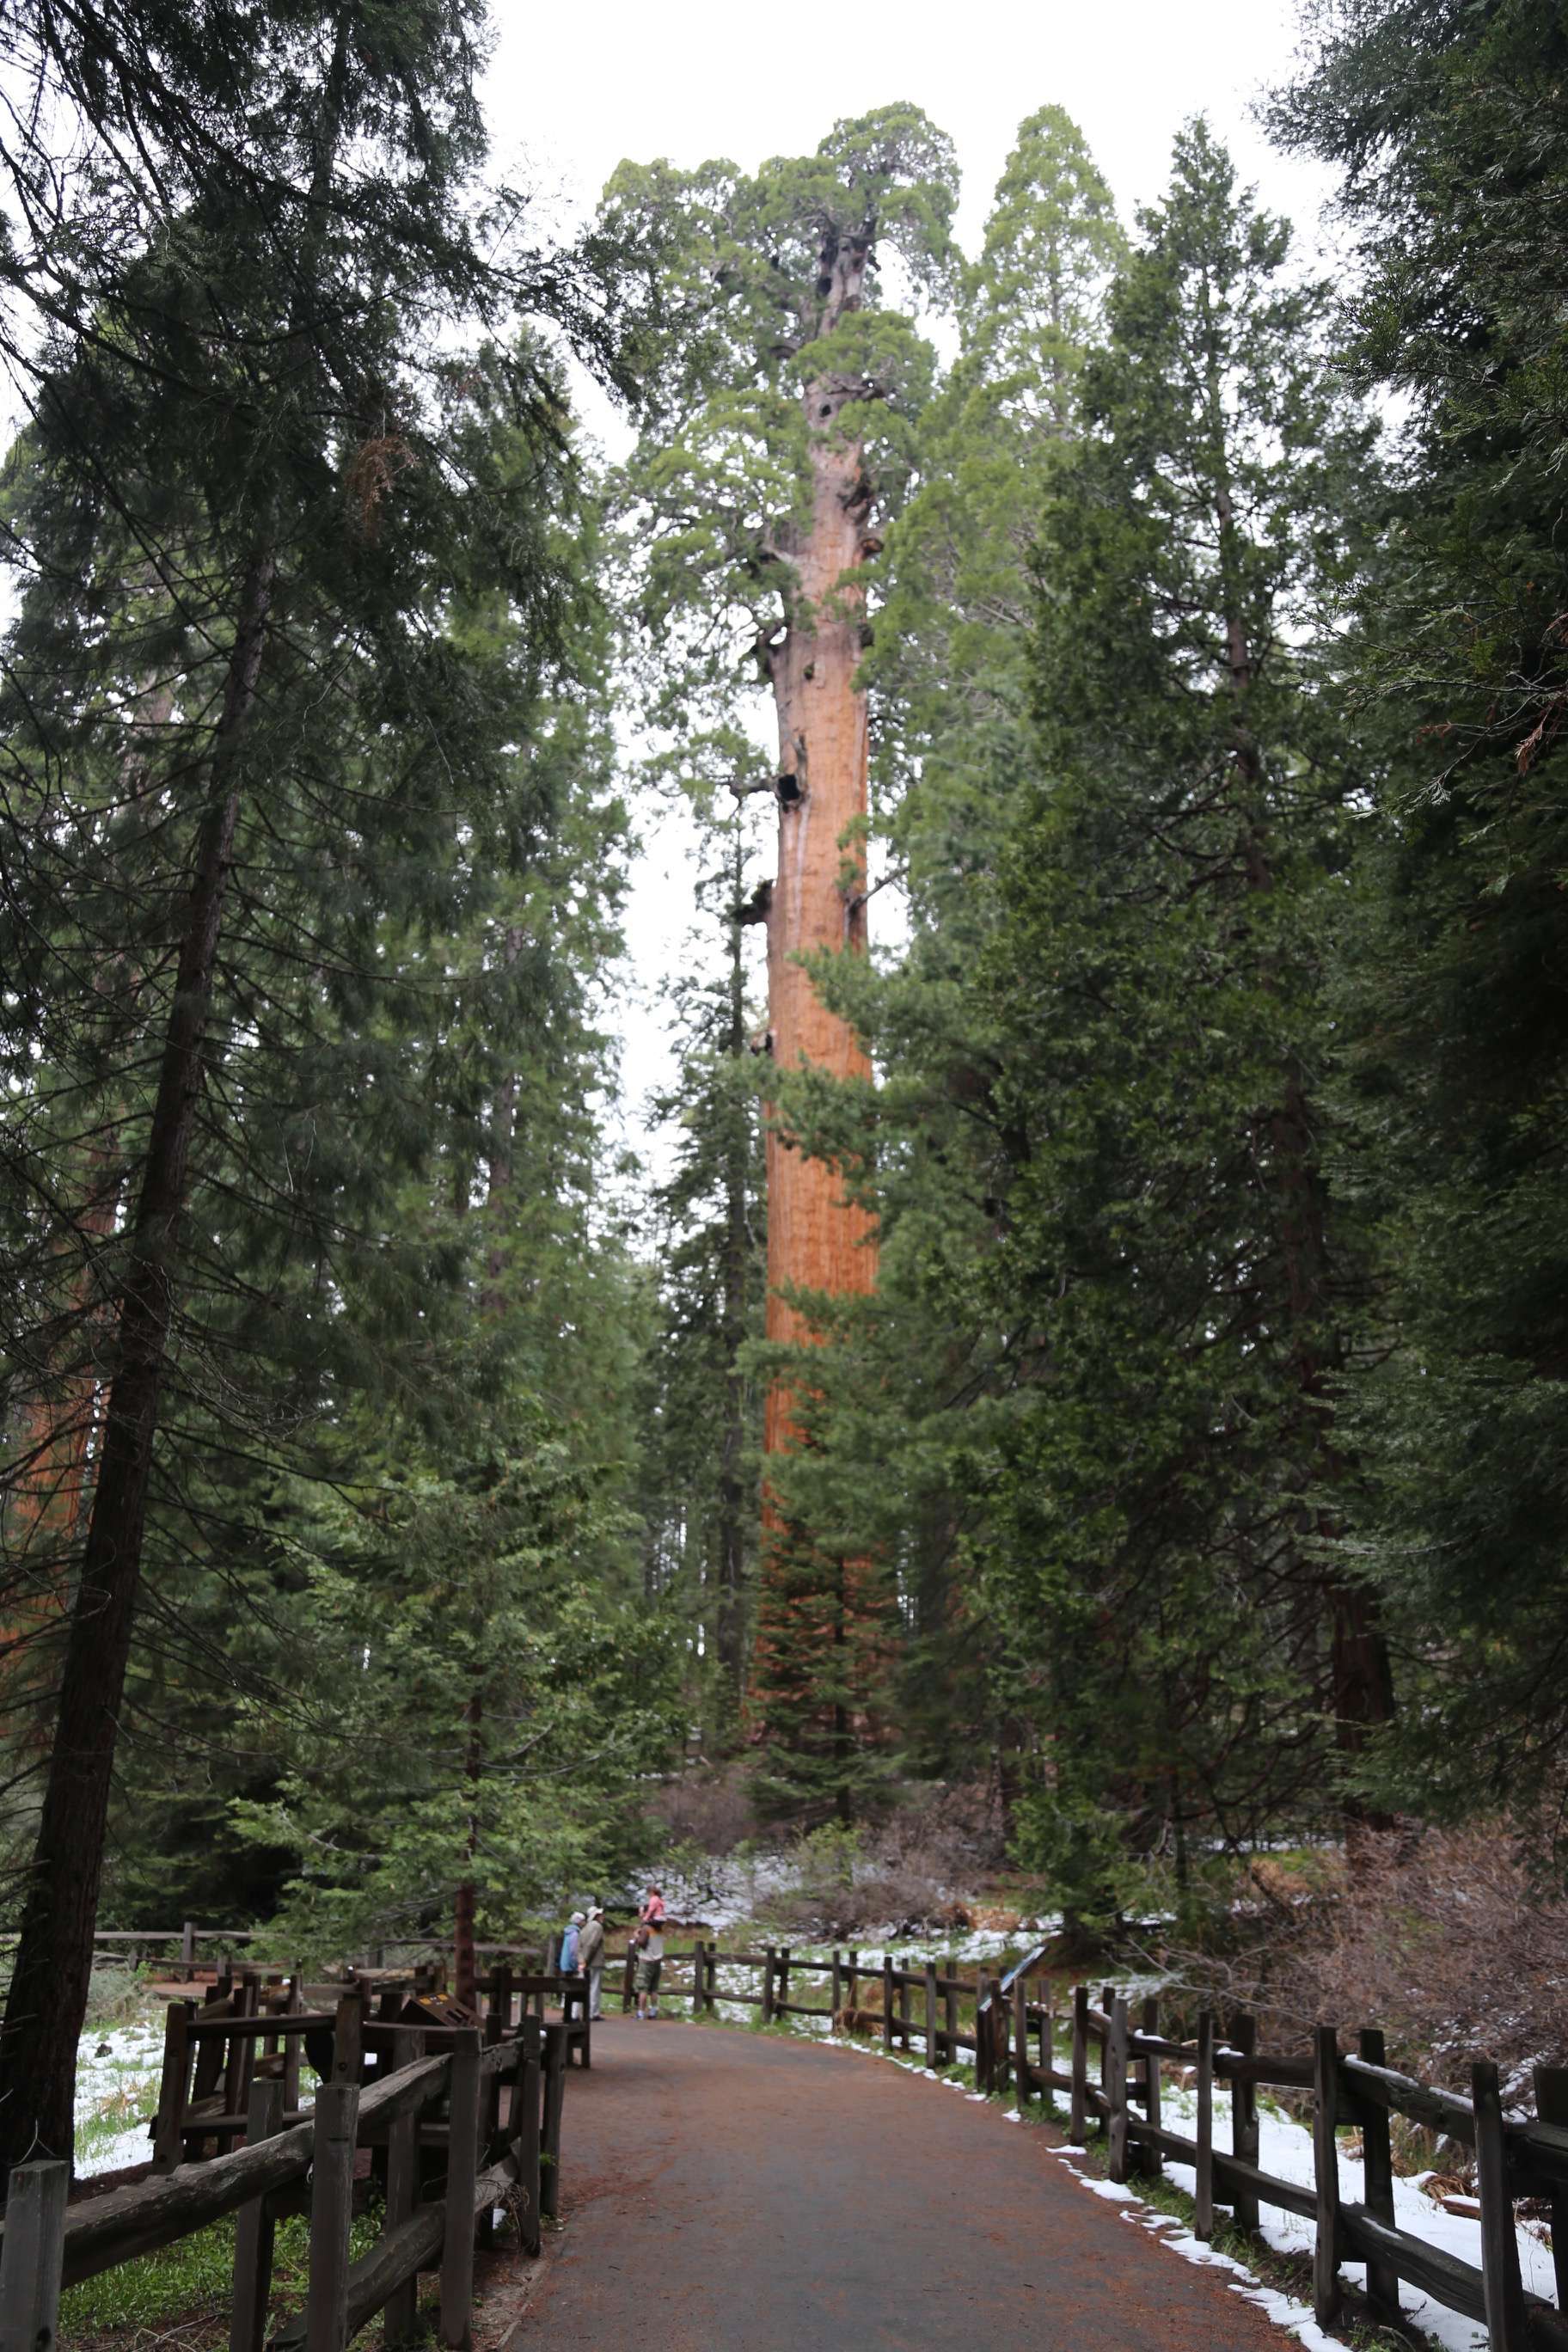 This pathway in KCNP helps place the sheer size of sequoias into some sort of perspective.